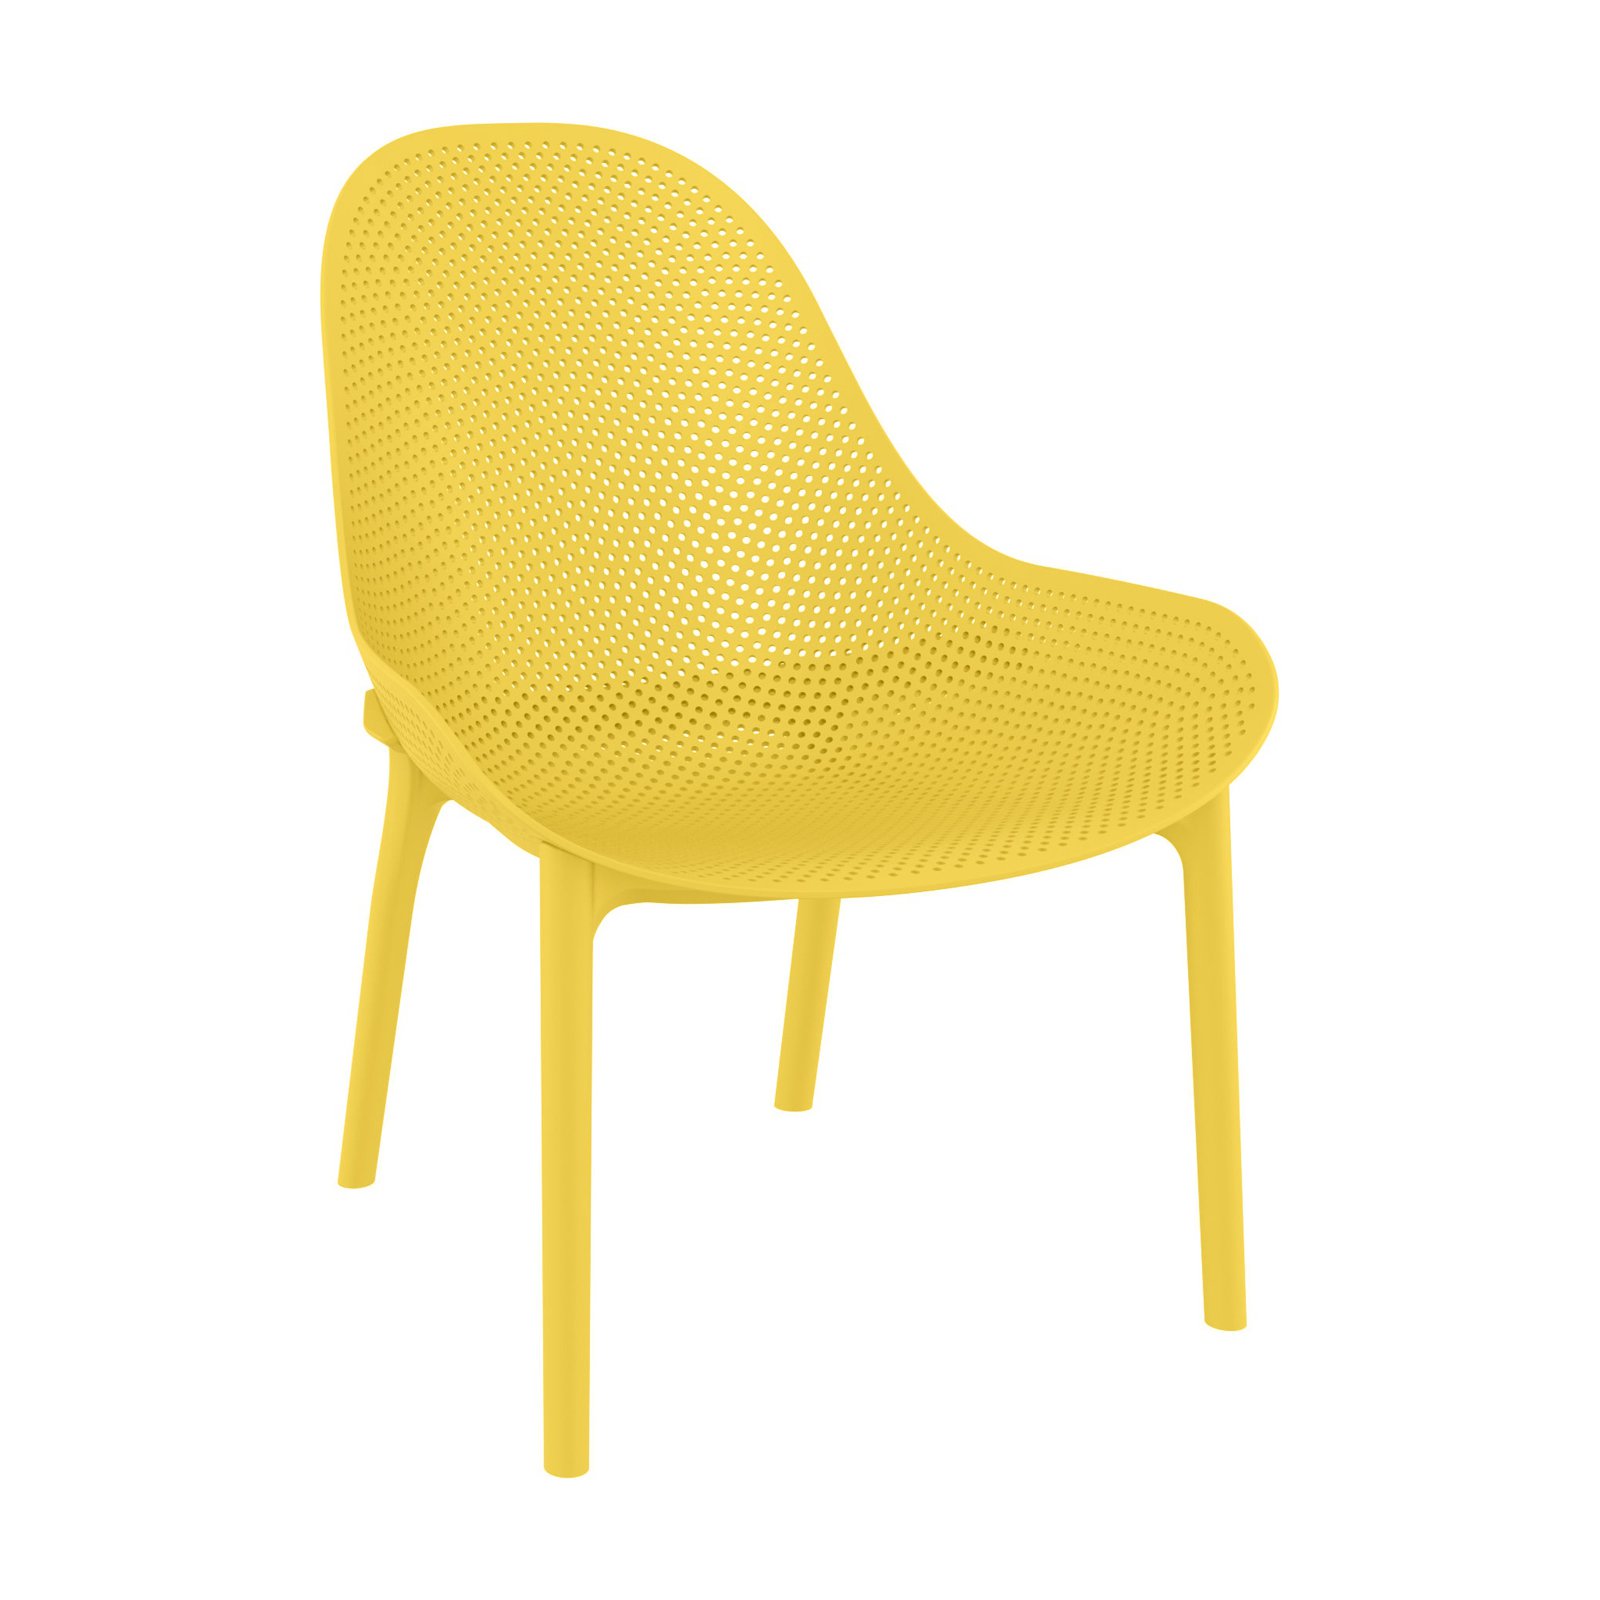 Compamia Sky Patio Chair in Yellow - image 1 of 11